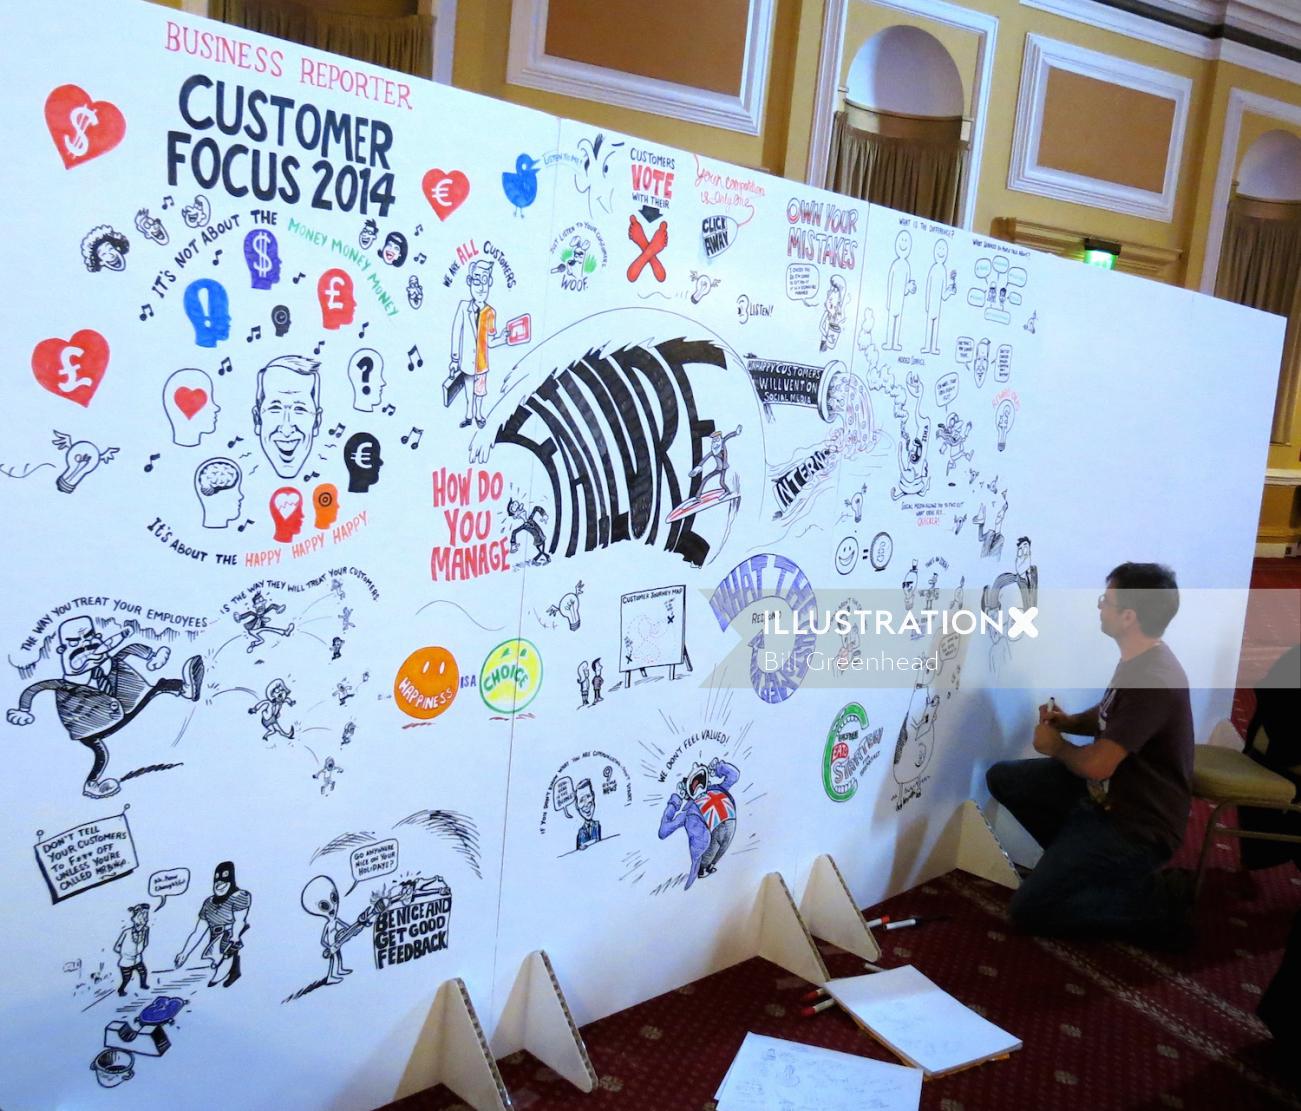 Live event drawing customer focus
